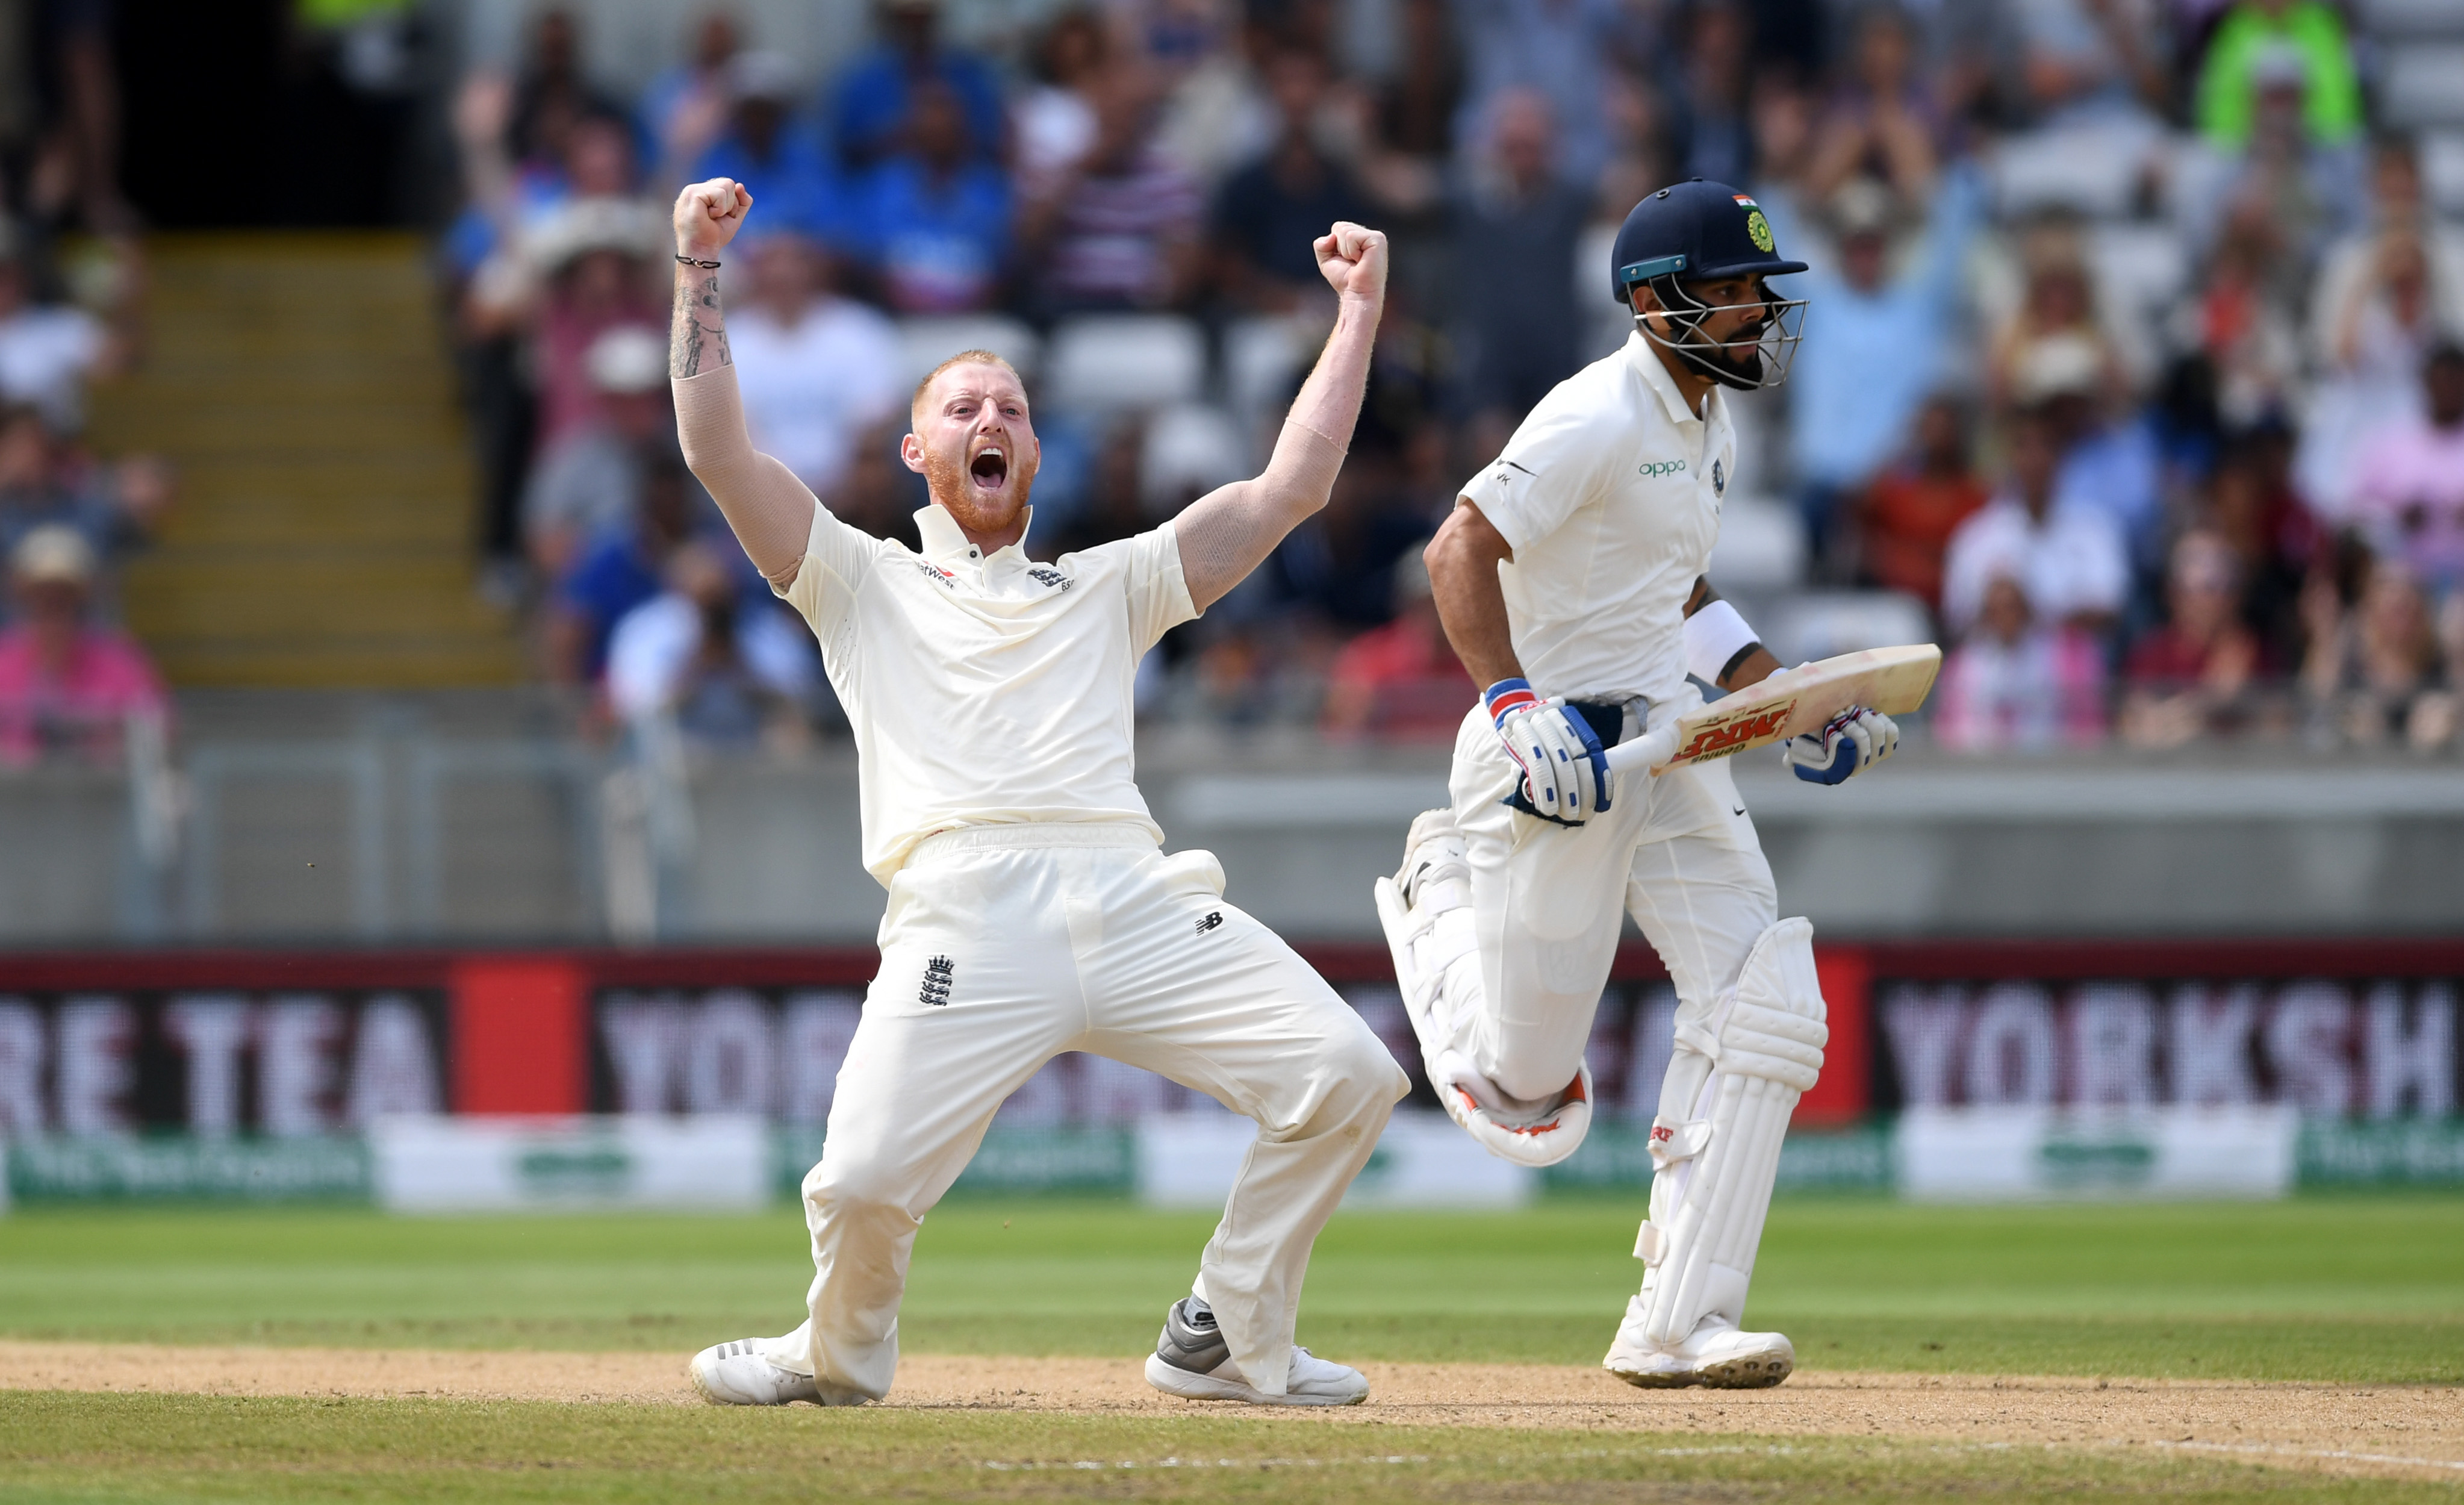 India vs England | Ben Stokes four-fer guides England to an early series lead